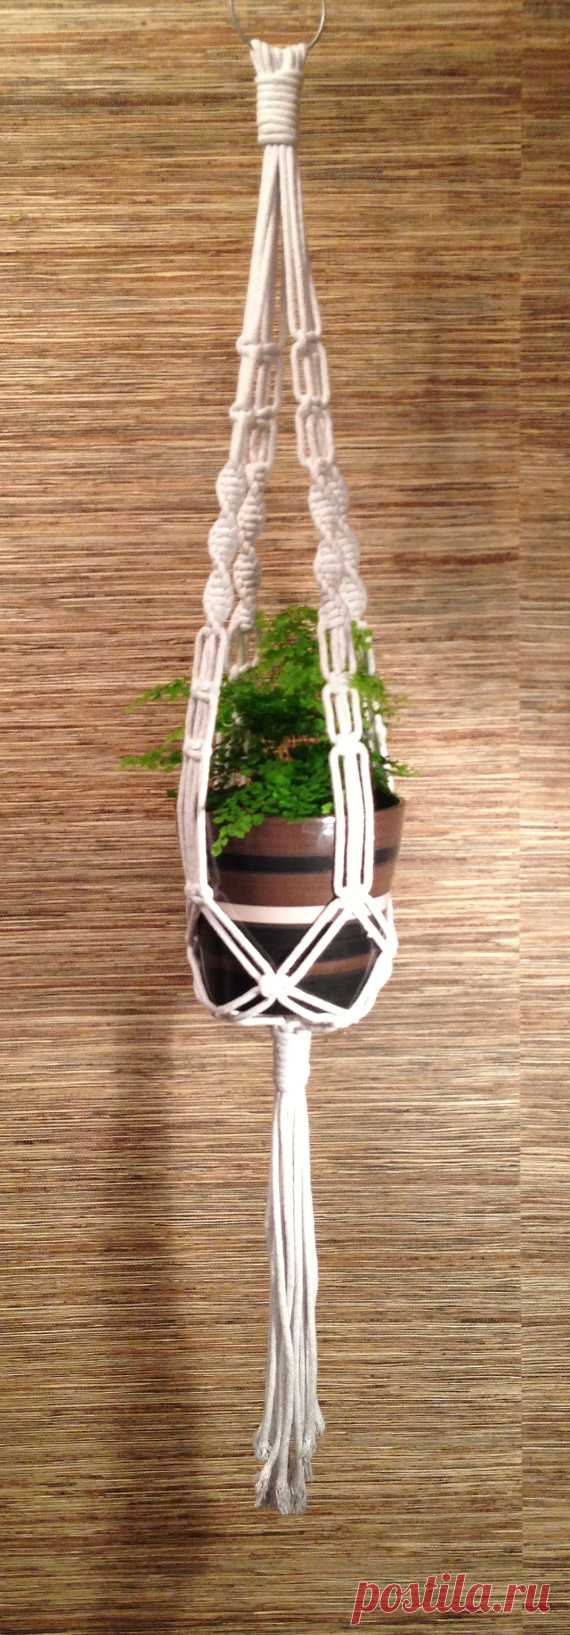 Macrame Plant Hanger / Basket Hanger - White Hand crafted on the Gold Coast in Australia, this hanger is 110cm from the top to the bottom of the fringe, and 70cm from the top to the bottom of the pot. Suits a pot or bowl approximately 15cm wide.    Made with cotton rope, this hanger is great for indoor or outdoor use.    This item is very eye catching and looks great with a potted plant, or bowl for fruit or vegetables in it (the pot in this picture is not included).